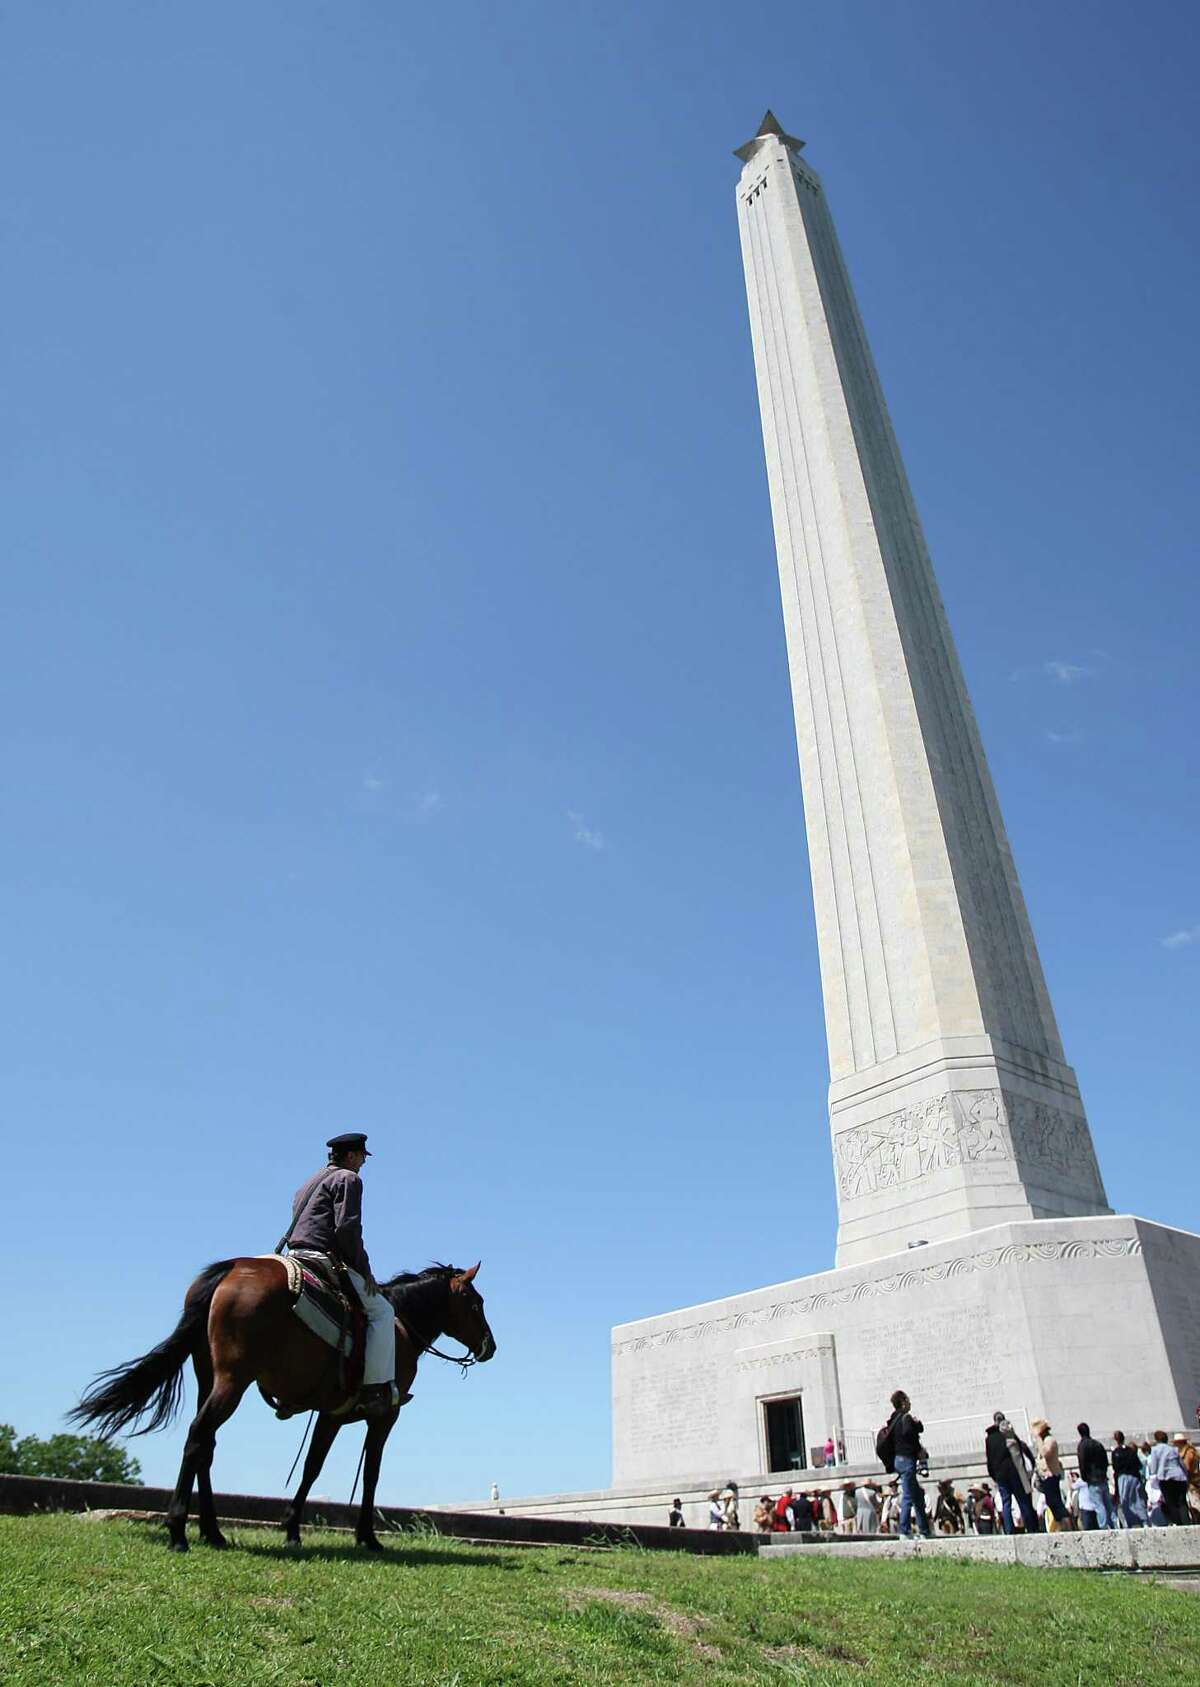 A Texas Army re-enactor sits on his horse near the San Jacinto Monument during festivities commemorating the anniversary of the Battle of San Jacinto.